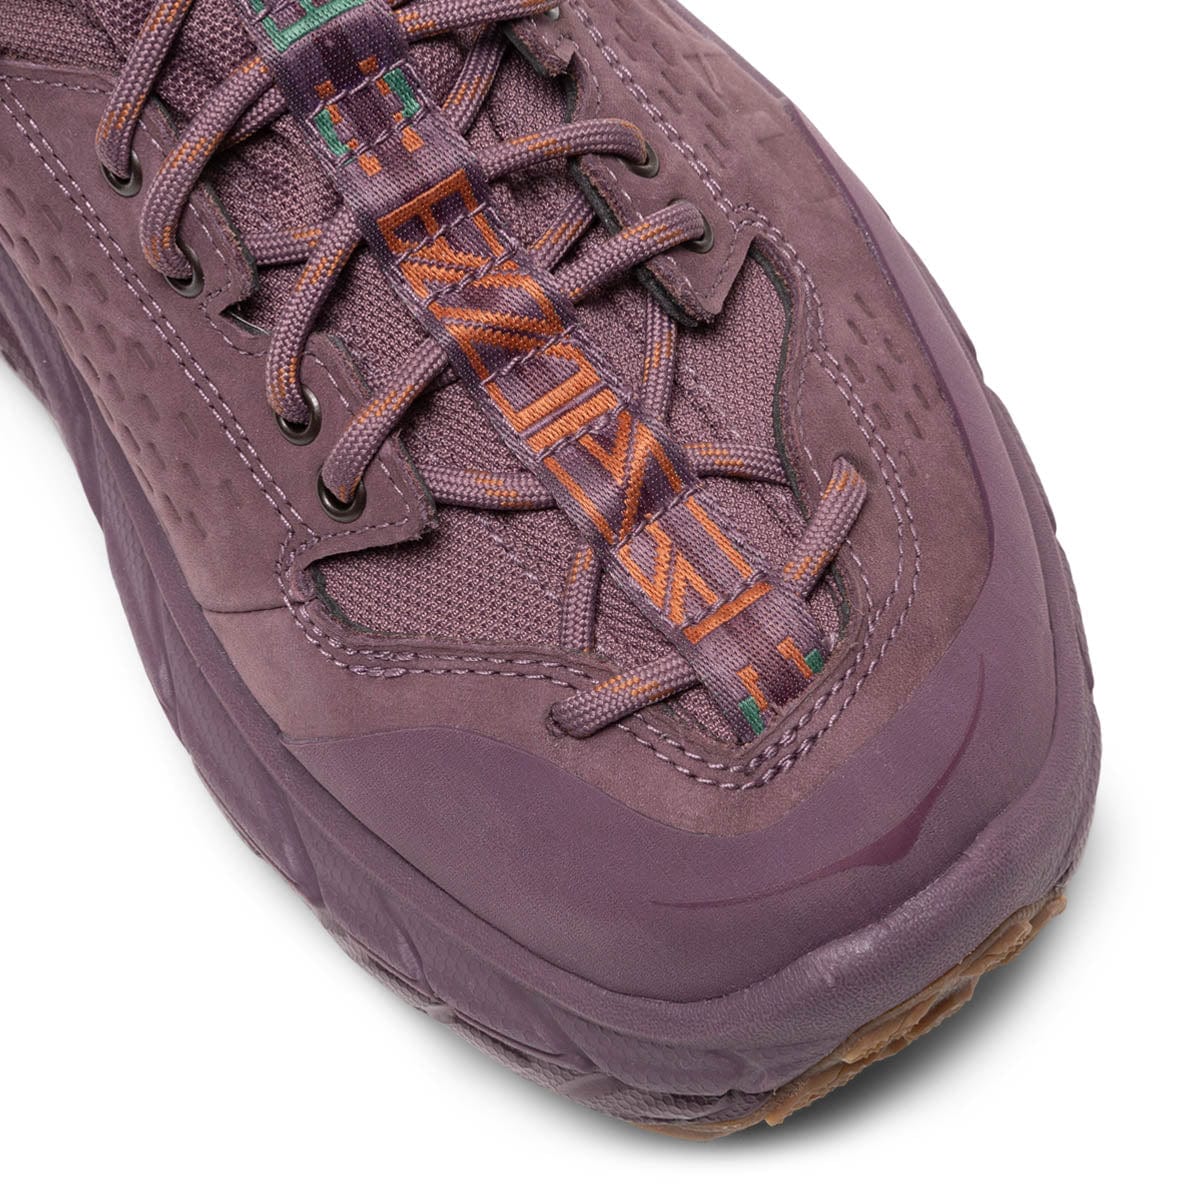 Bodega Adds Southwestern Hues to Hoka's Tor Ultra Hiking Boots for Their  Second Collaboration